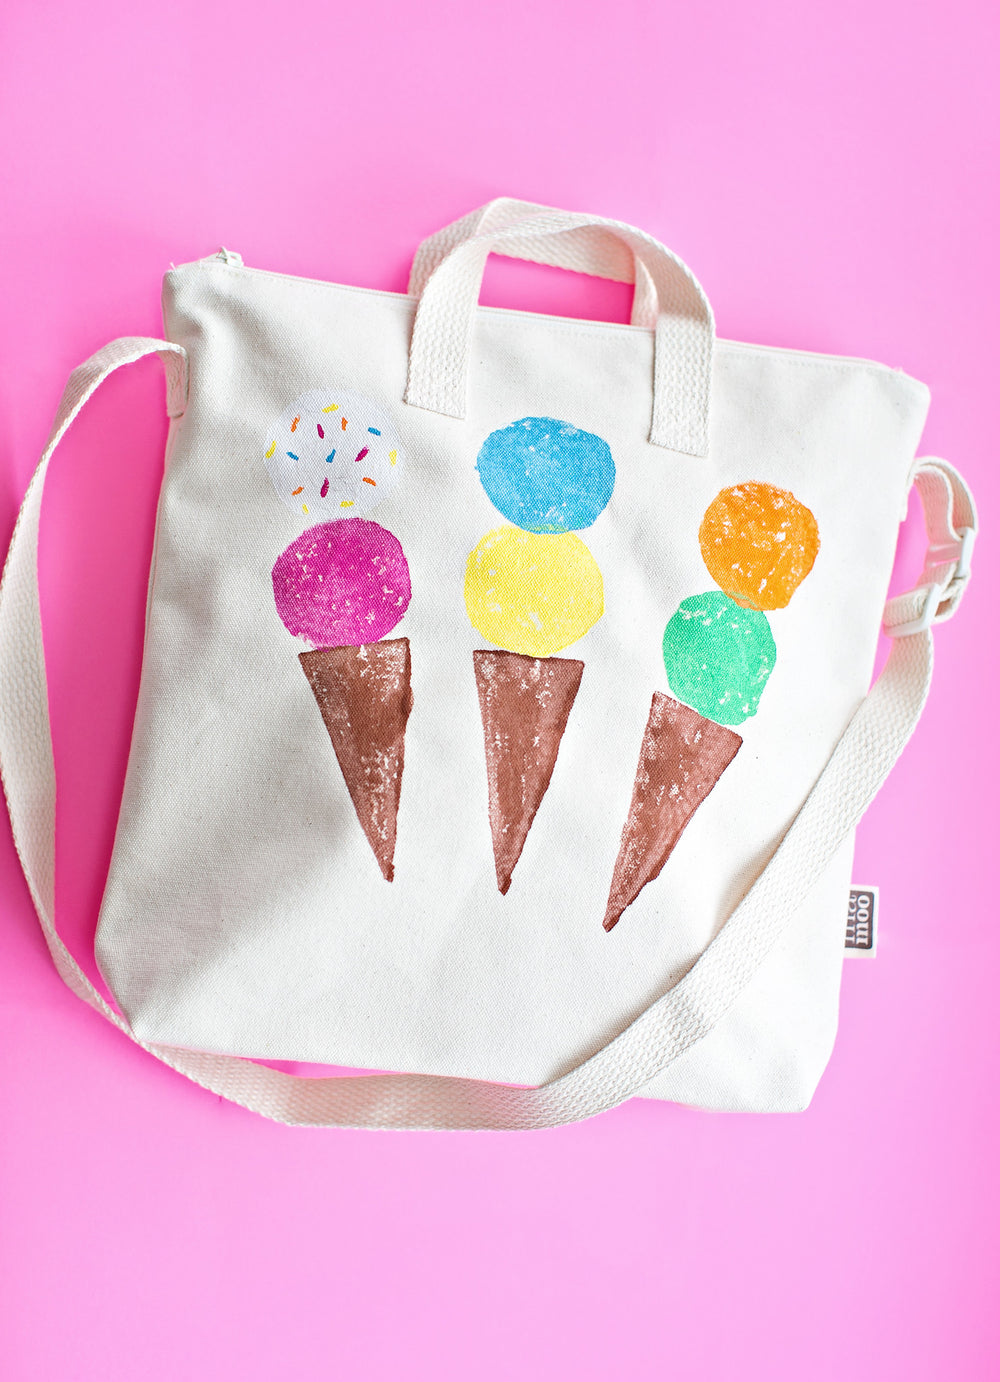 Limited Edition Blank Artist Canvas Kids Zipper Tote Bag | Locally made, washable canvas tote bags.